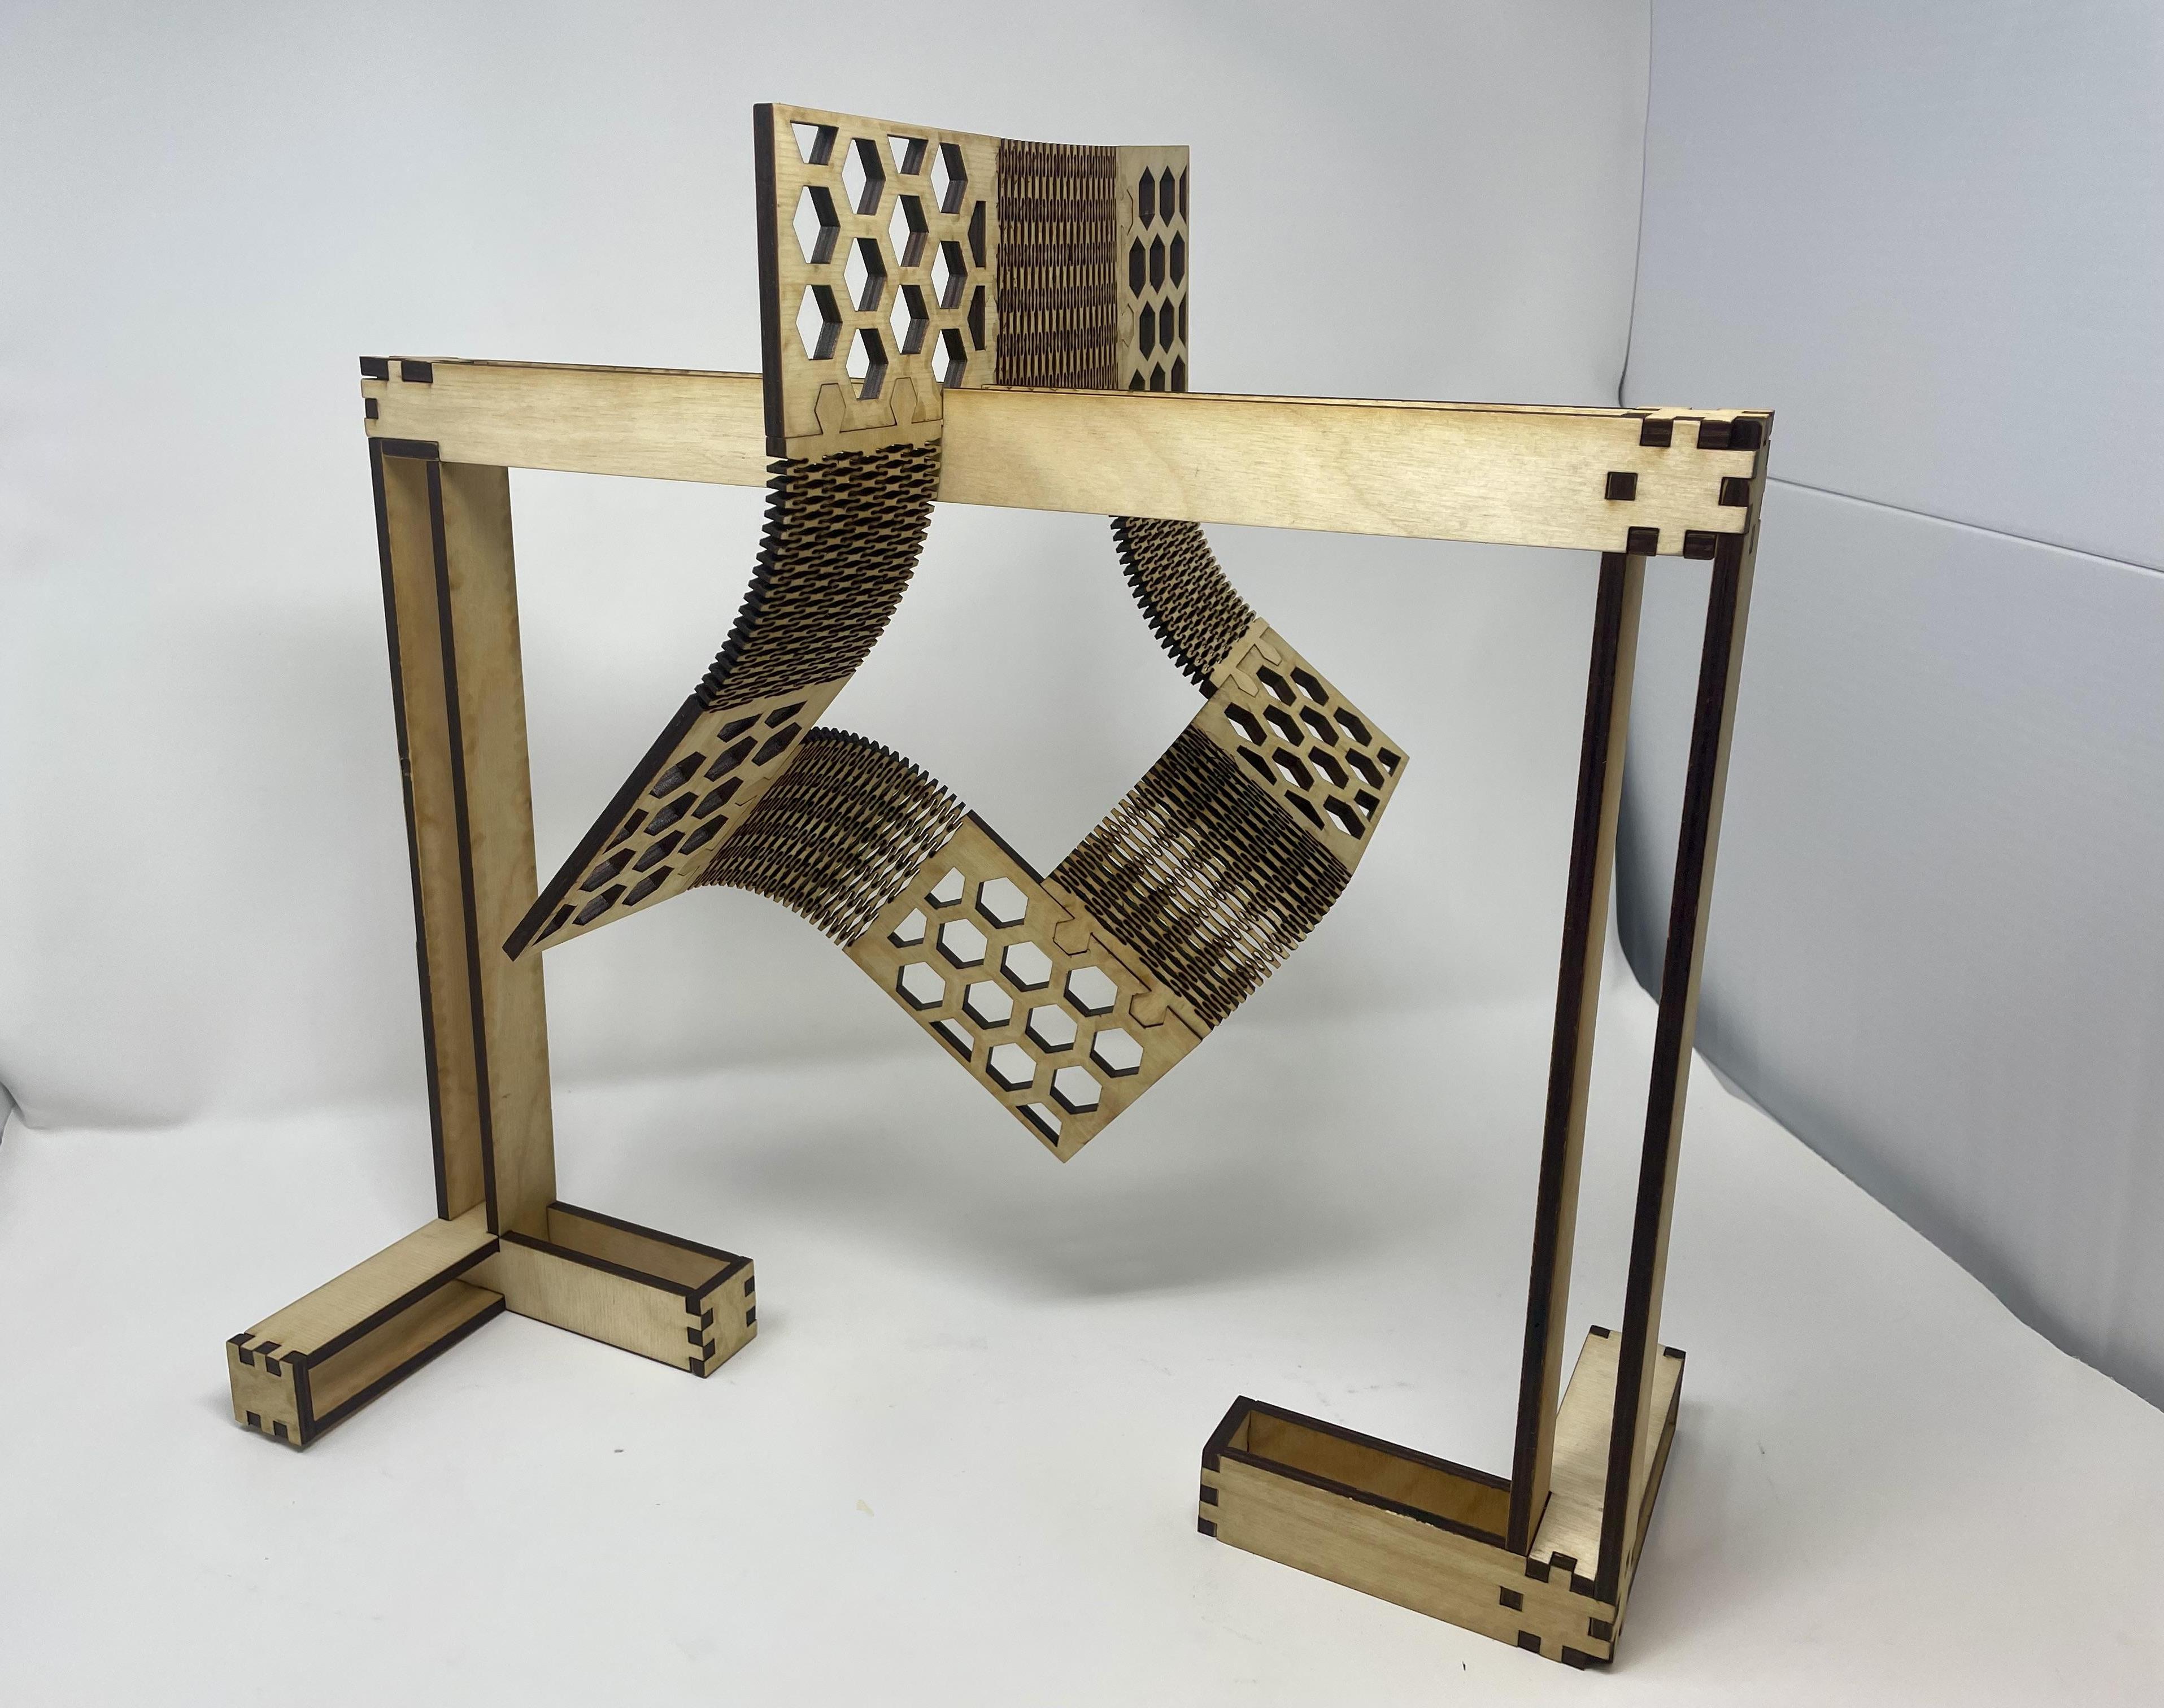 Laser Cut Living Hinge and 3d Tenon Joint Kinetic Sculpture